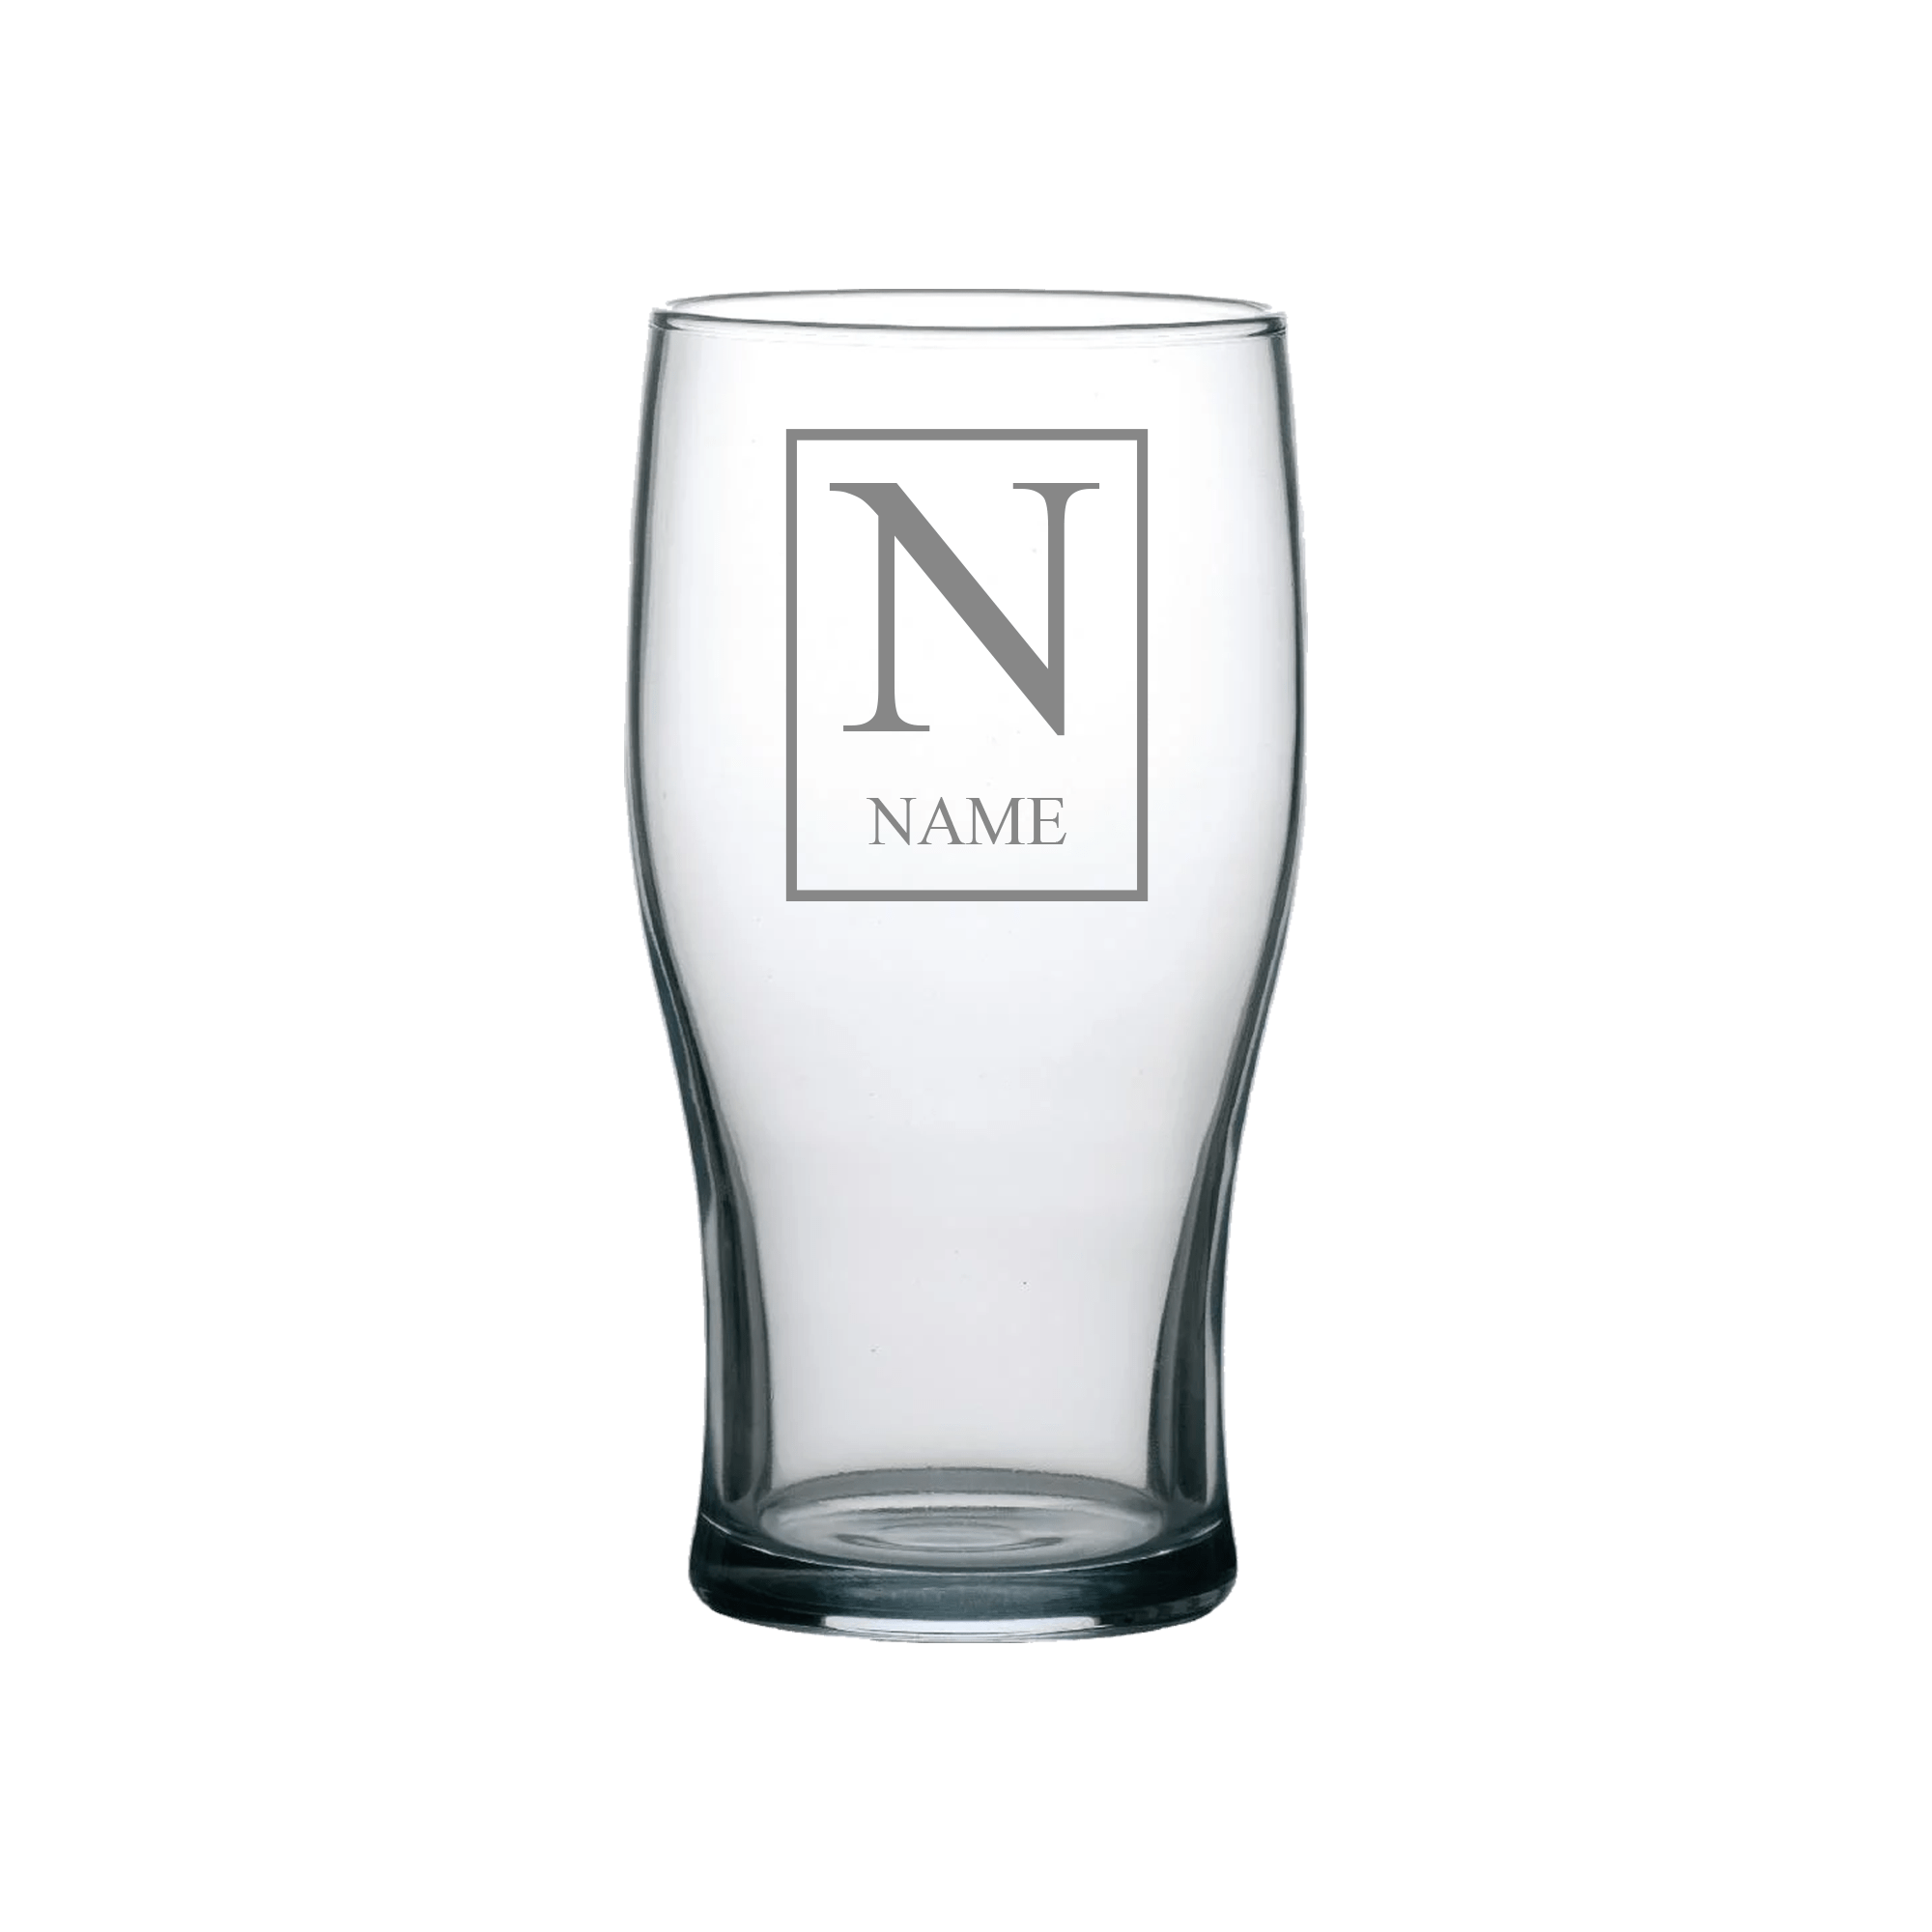 Personalised Engraved Pint Glass - So Bespoke Gifts